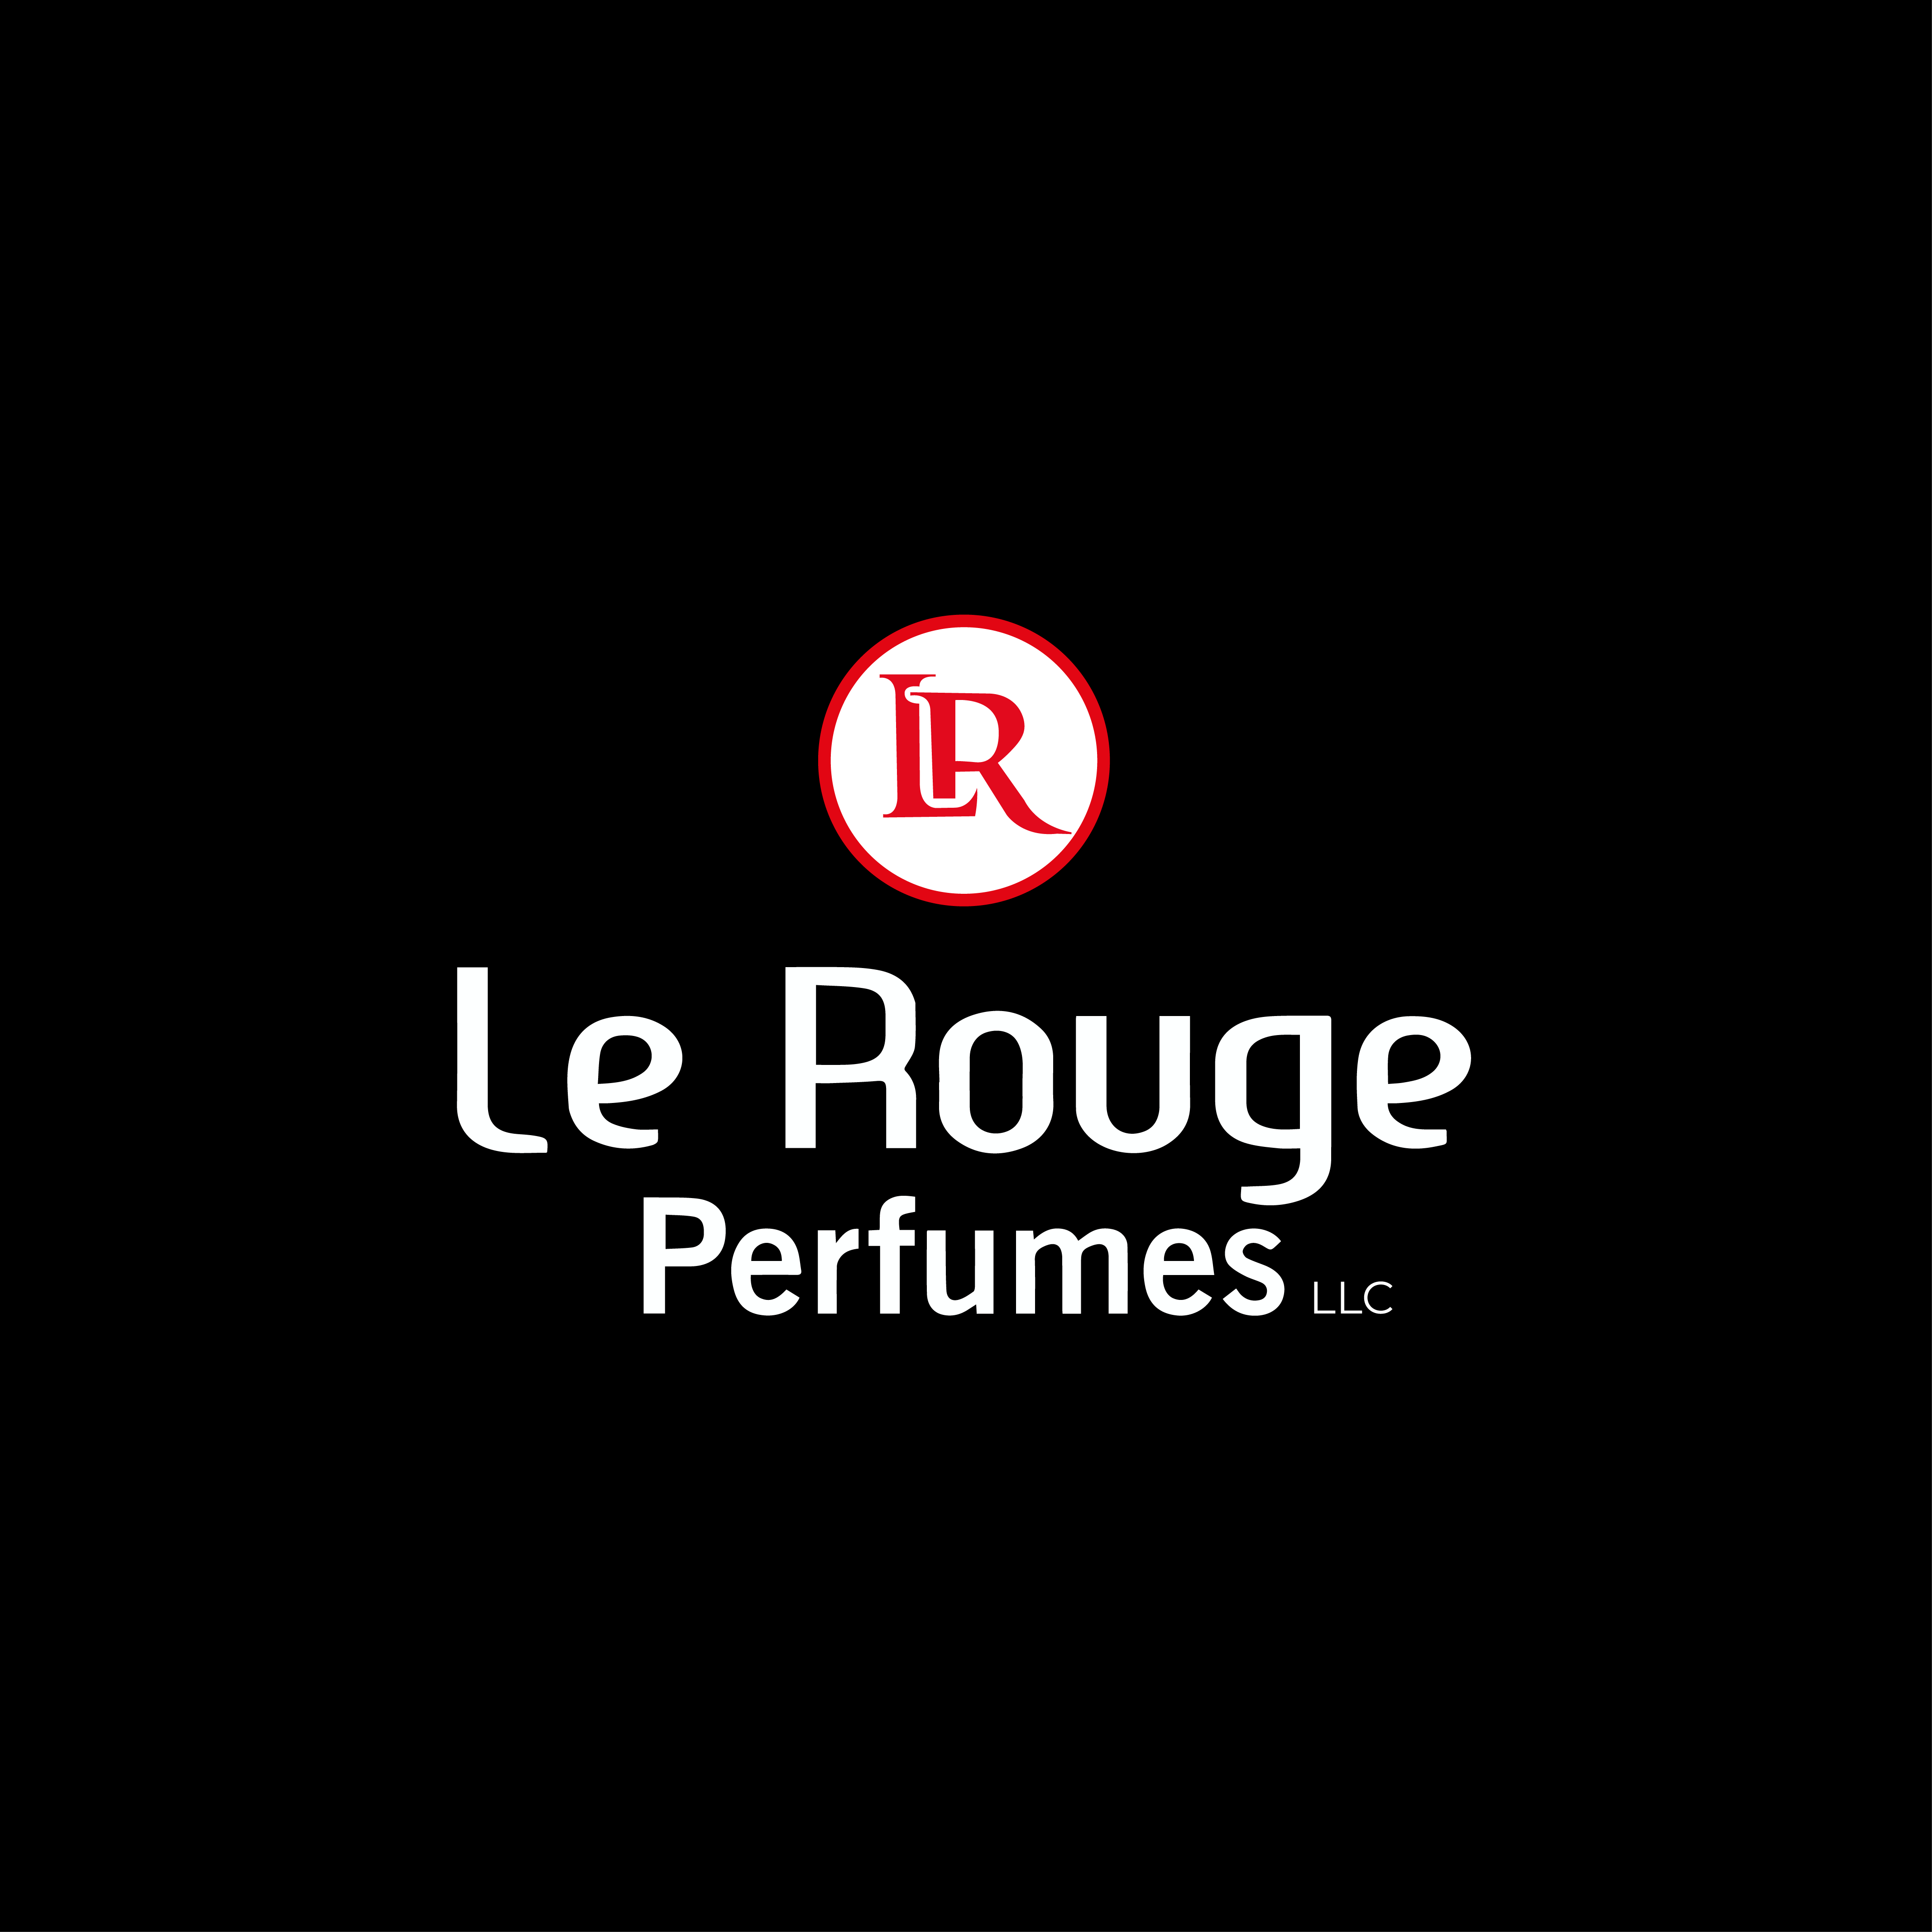 Le Rouge Perfumes